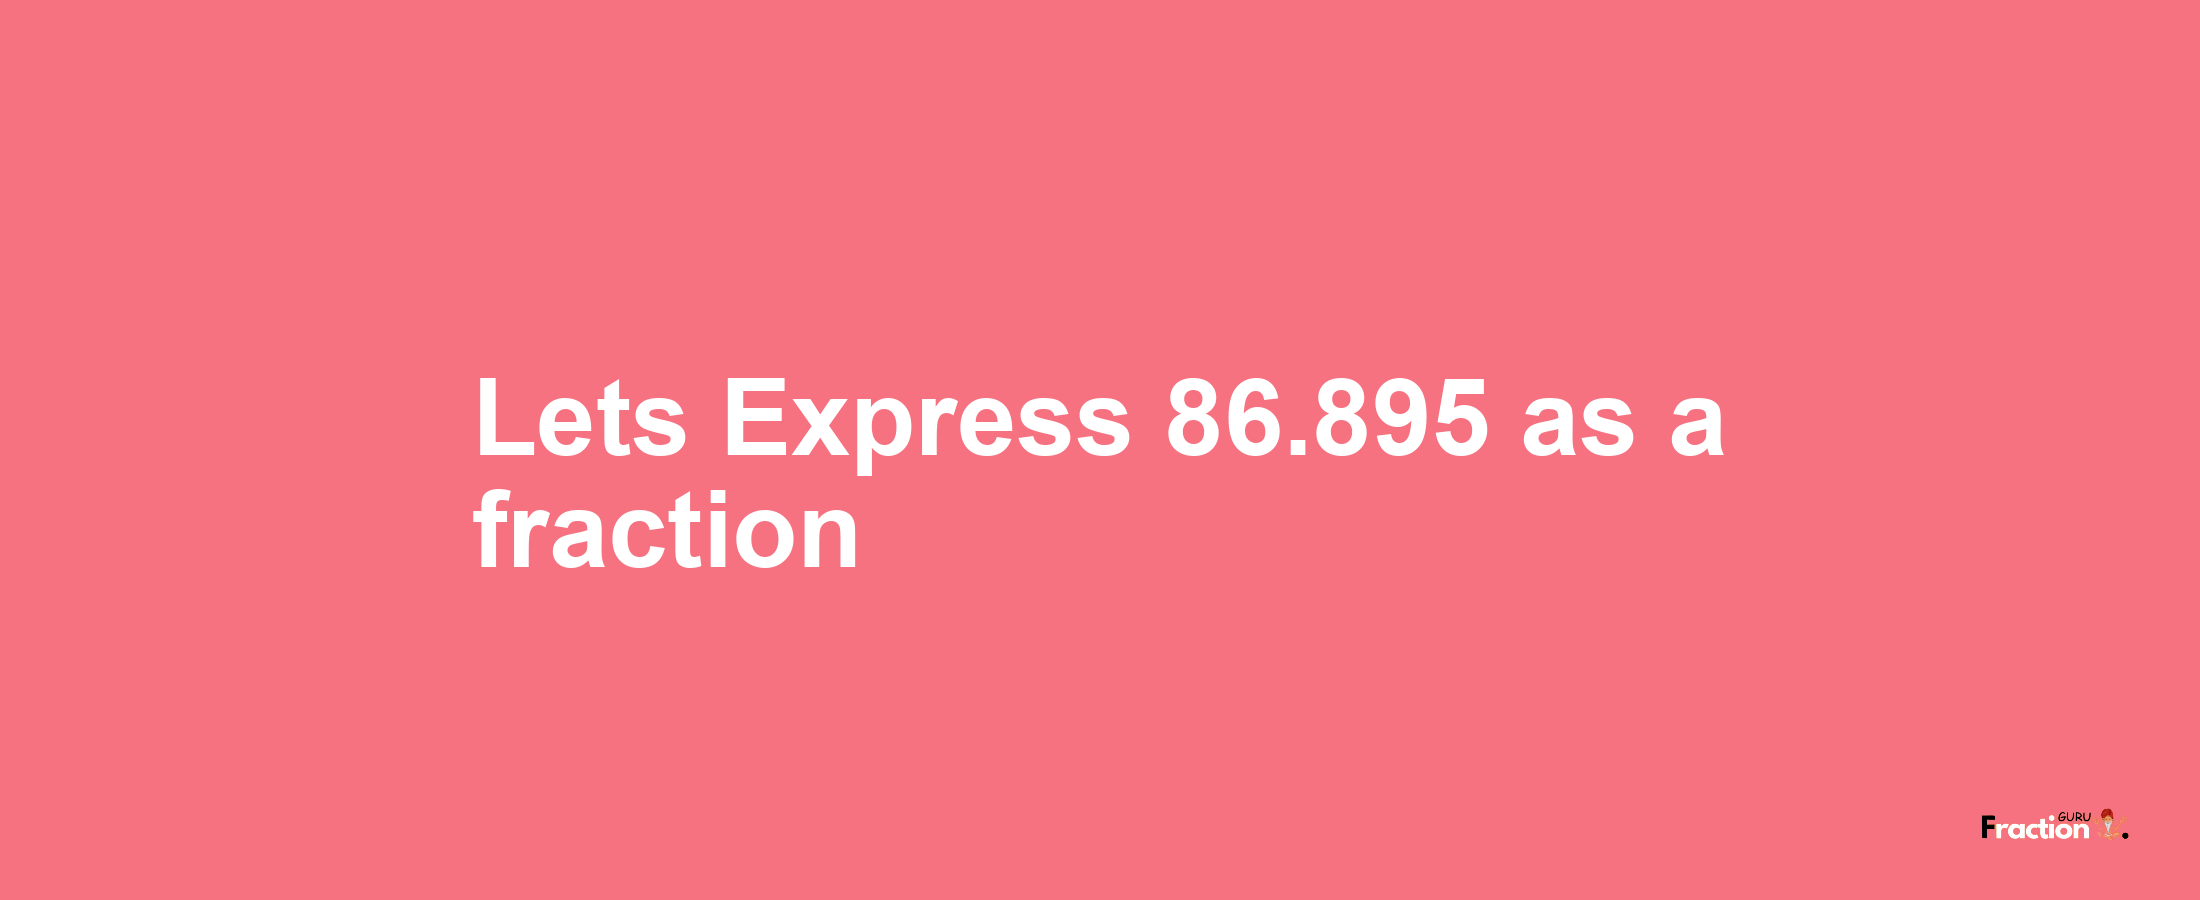 Lets Express 86.895 as afraction